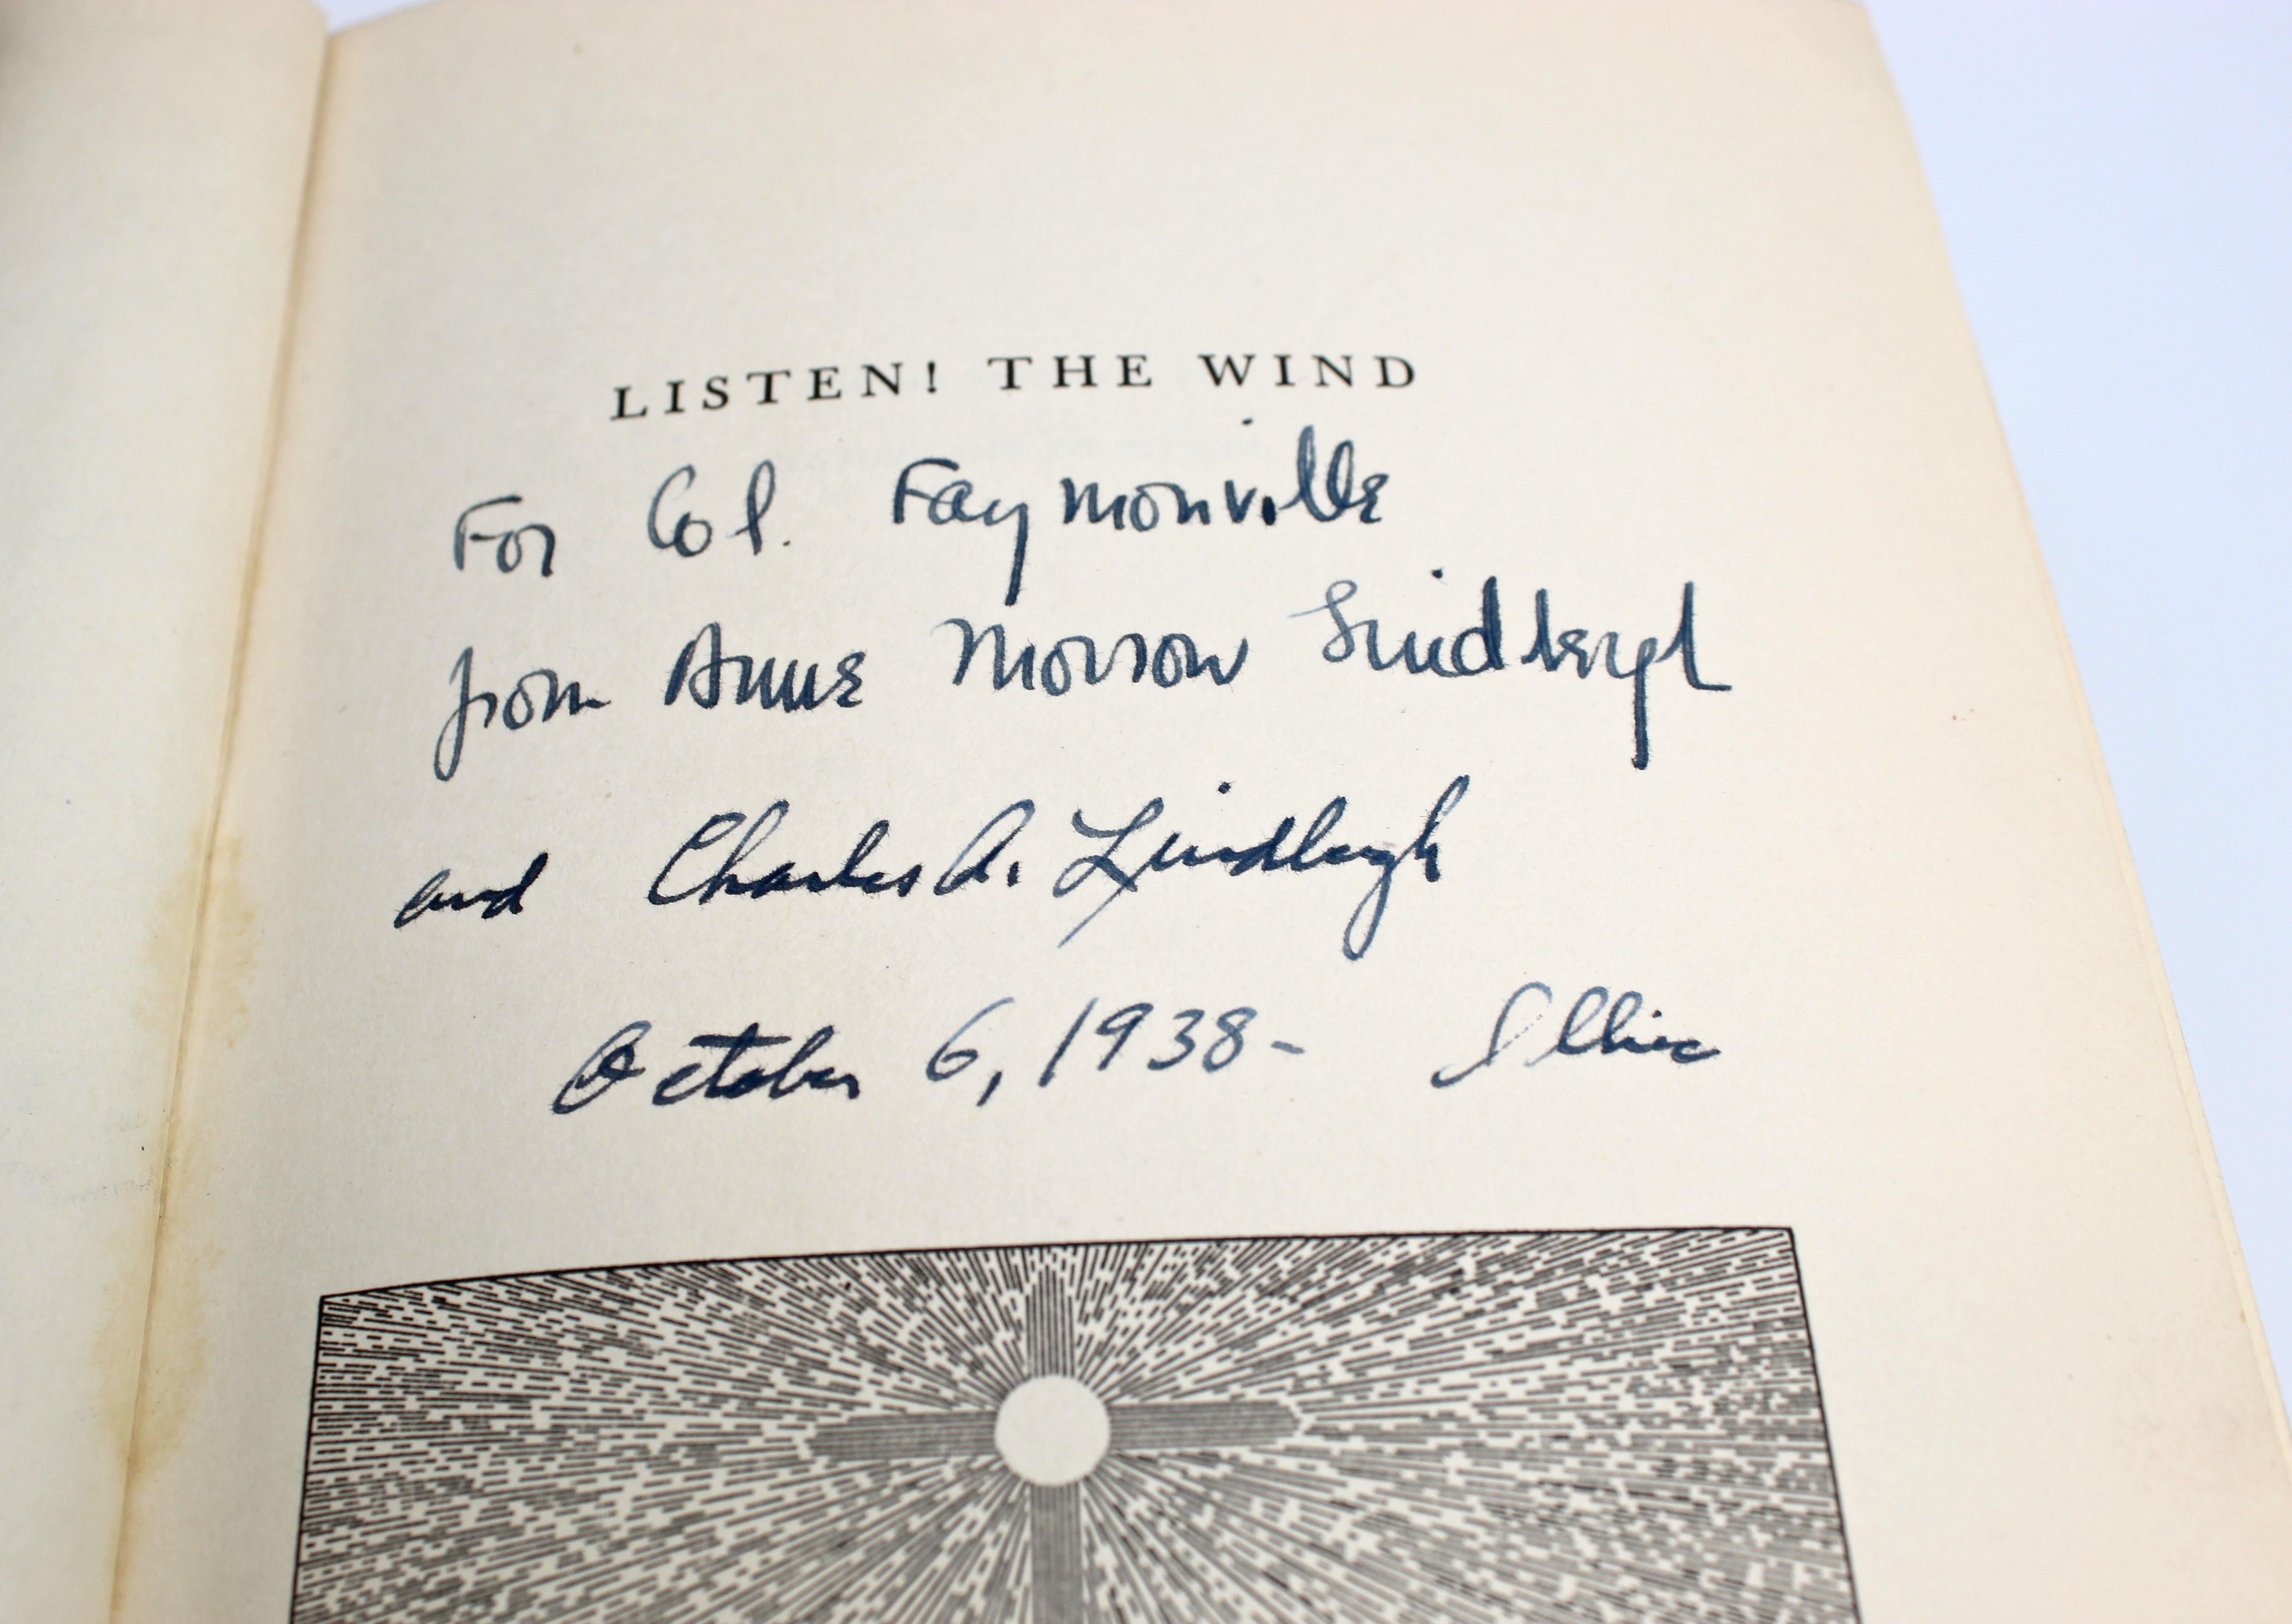 This is a 1938 first edition in its original dust jacket of Listen! The Wind by Anne Morrow Lindbergh. This remarkable printing is inscribed and signed by both Anne and her husband and famed pilot, Charles Lindbergh. The book features a foreward and